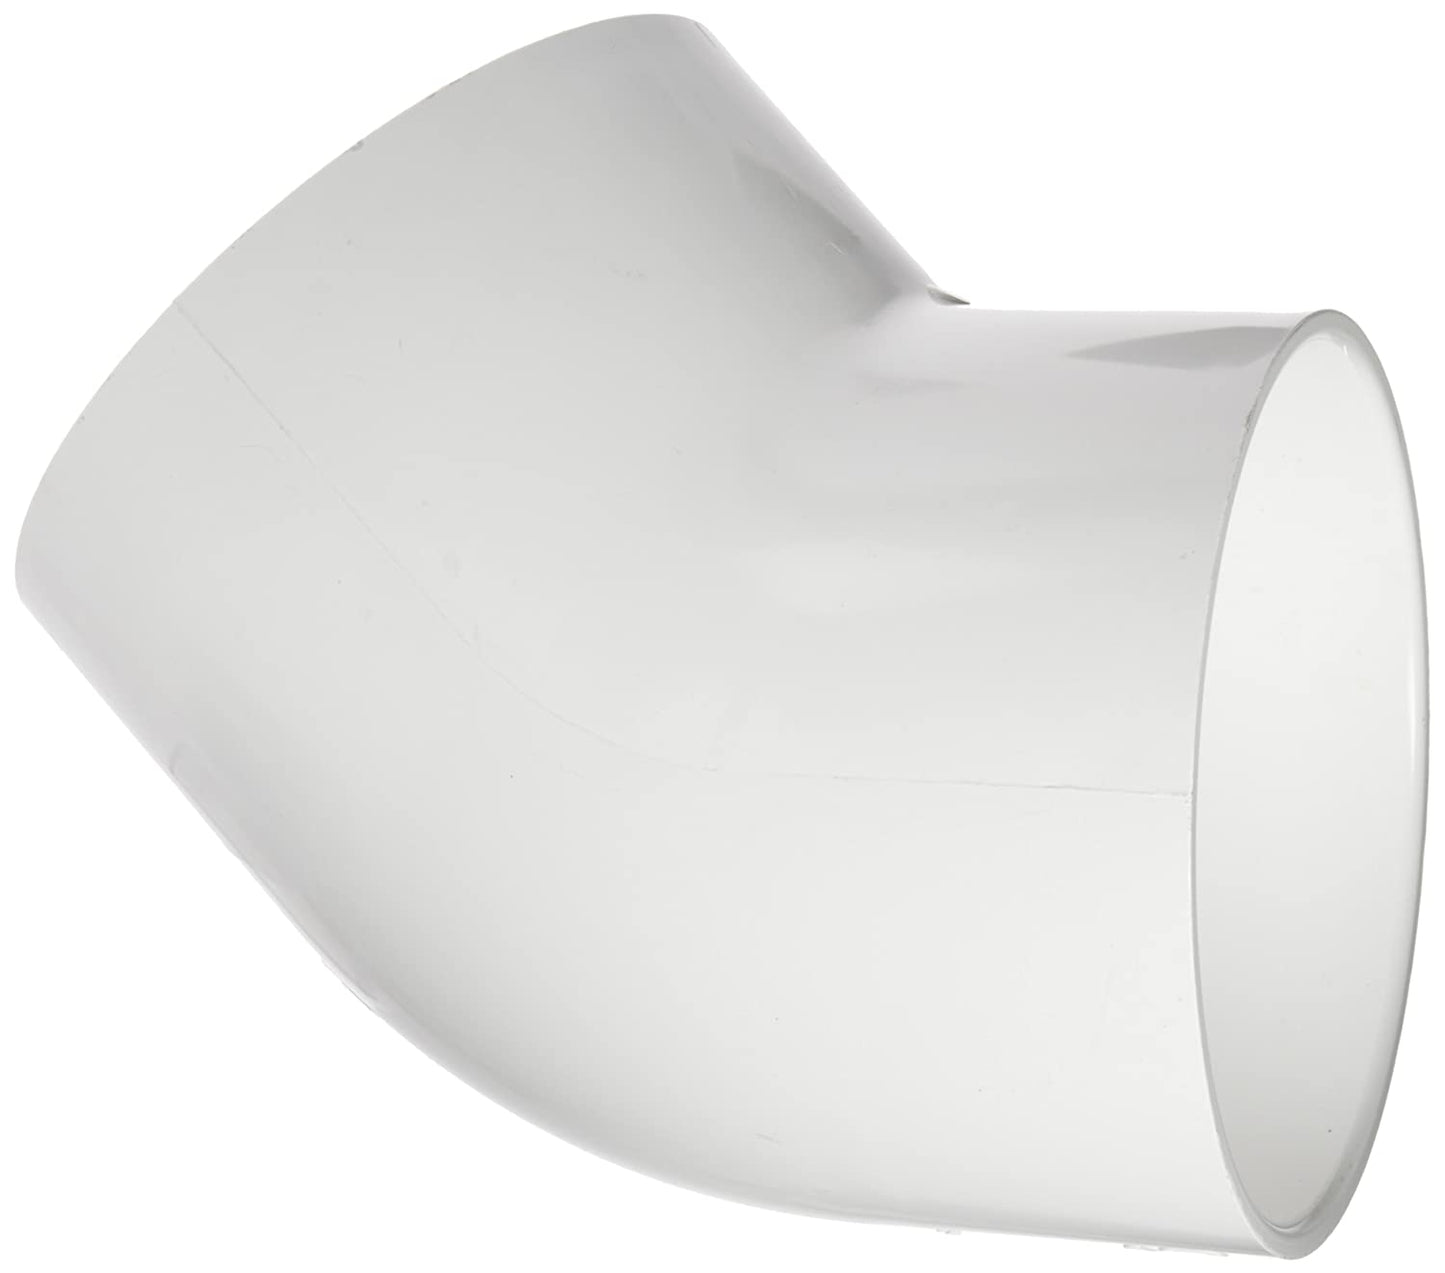 417-040 - 4" PVC Pipe Fitting, 45 Degree Elbow, Schedule 40, Socket